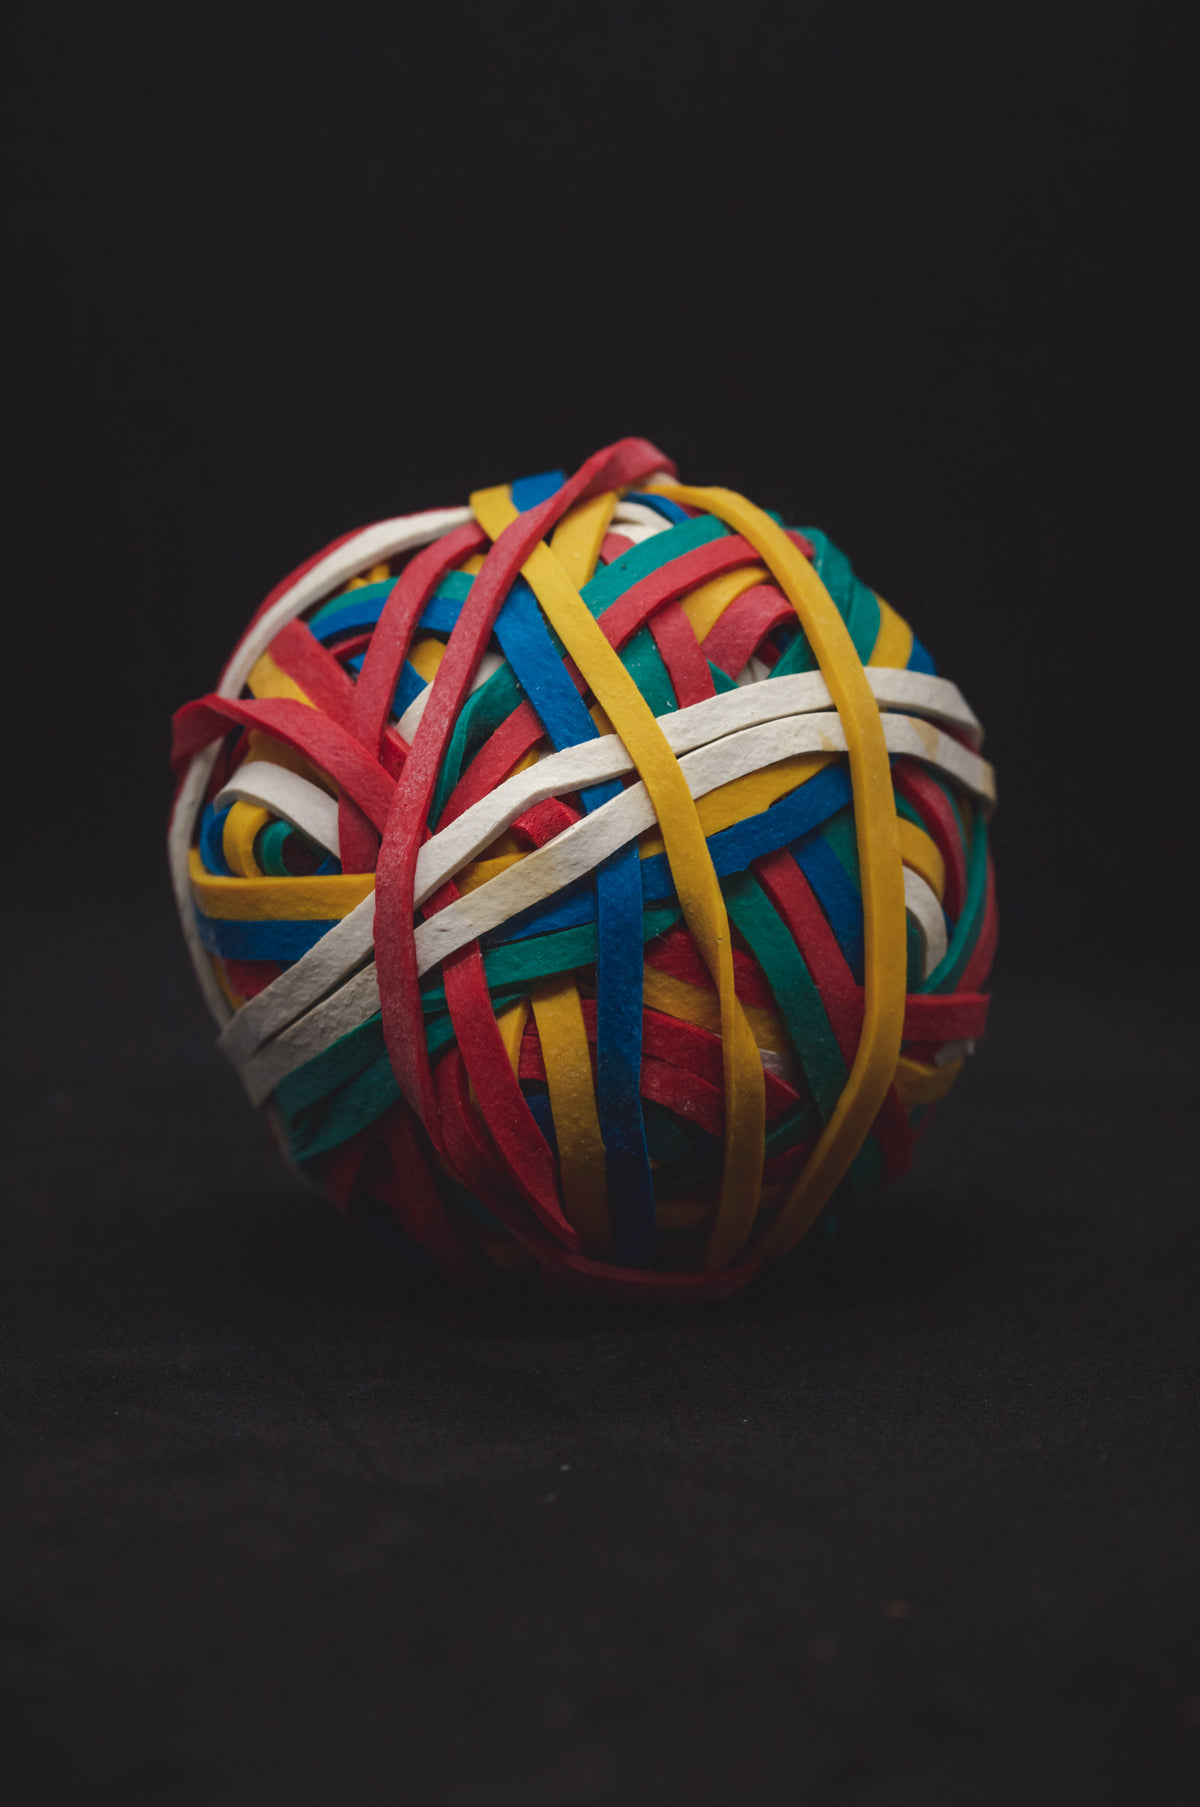 a ball of rubber bands